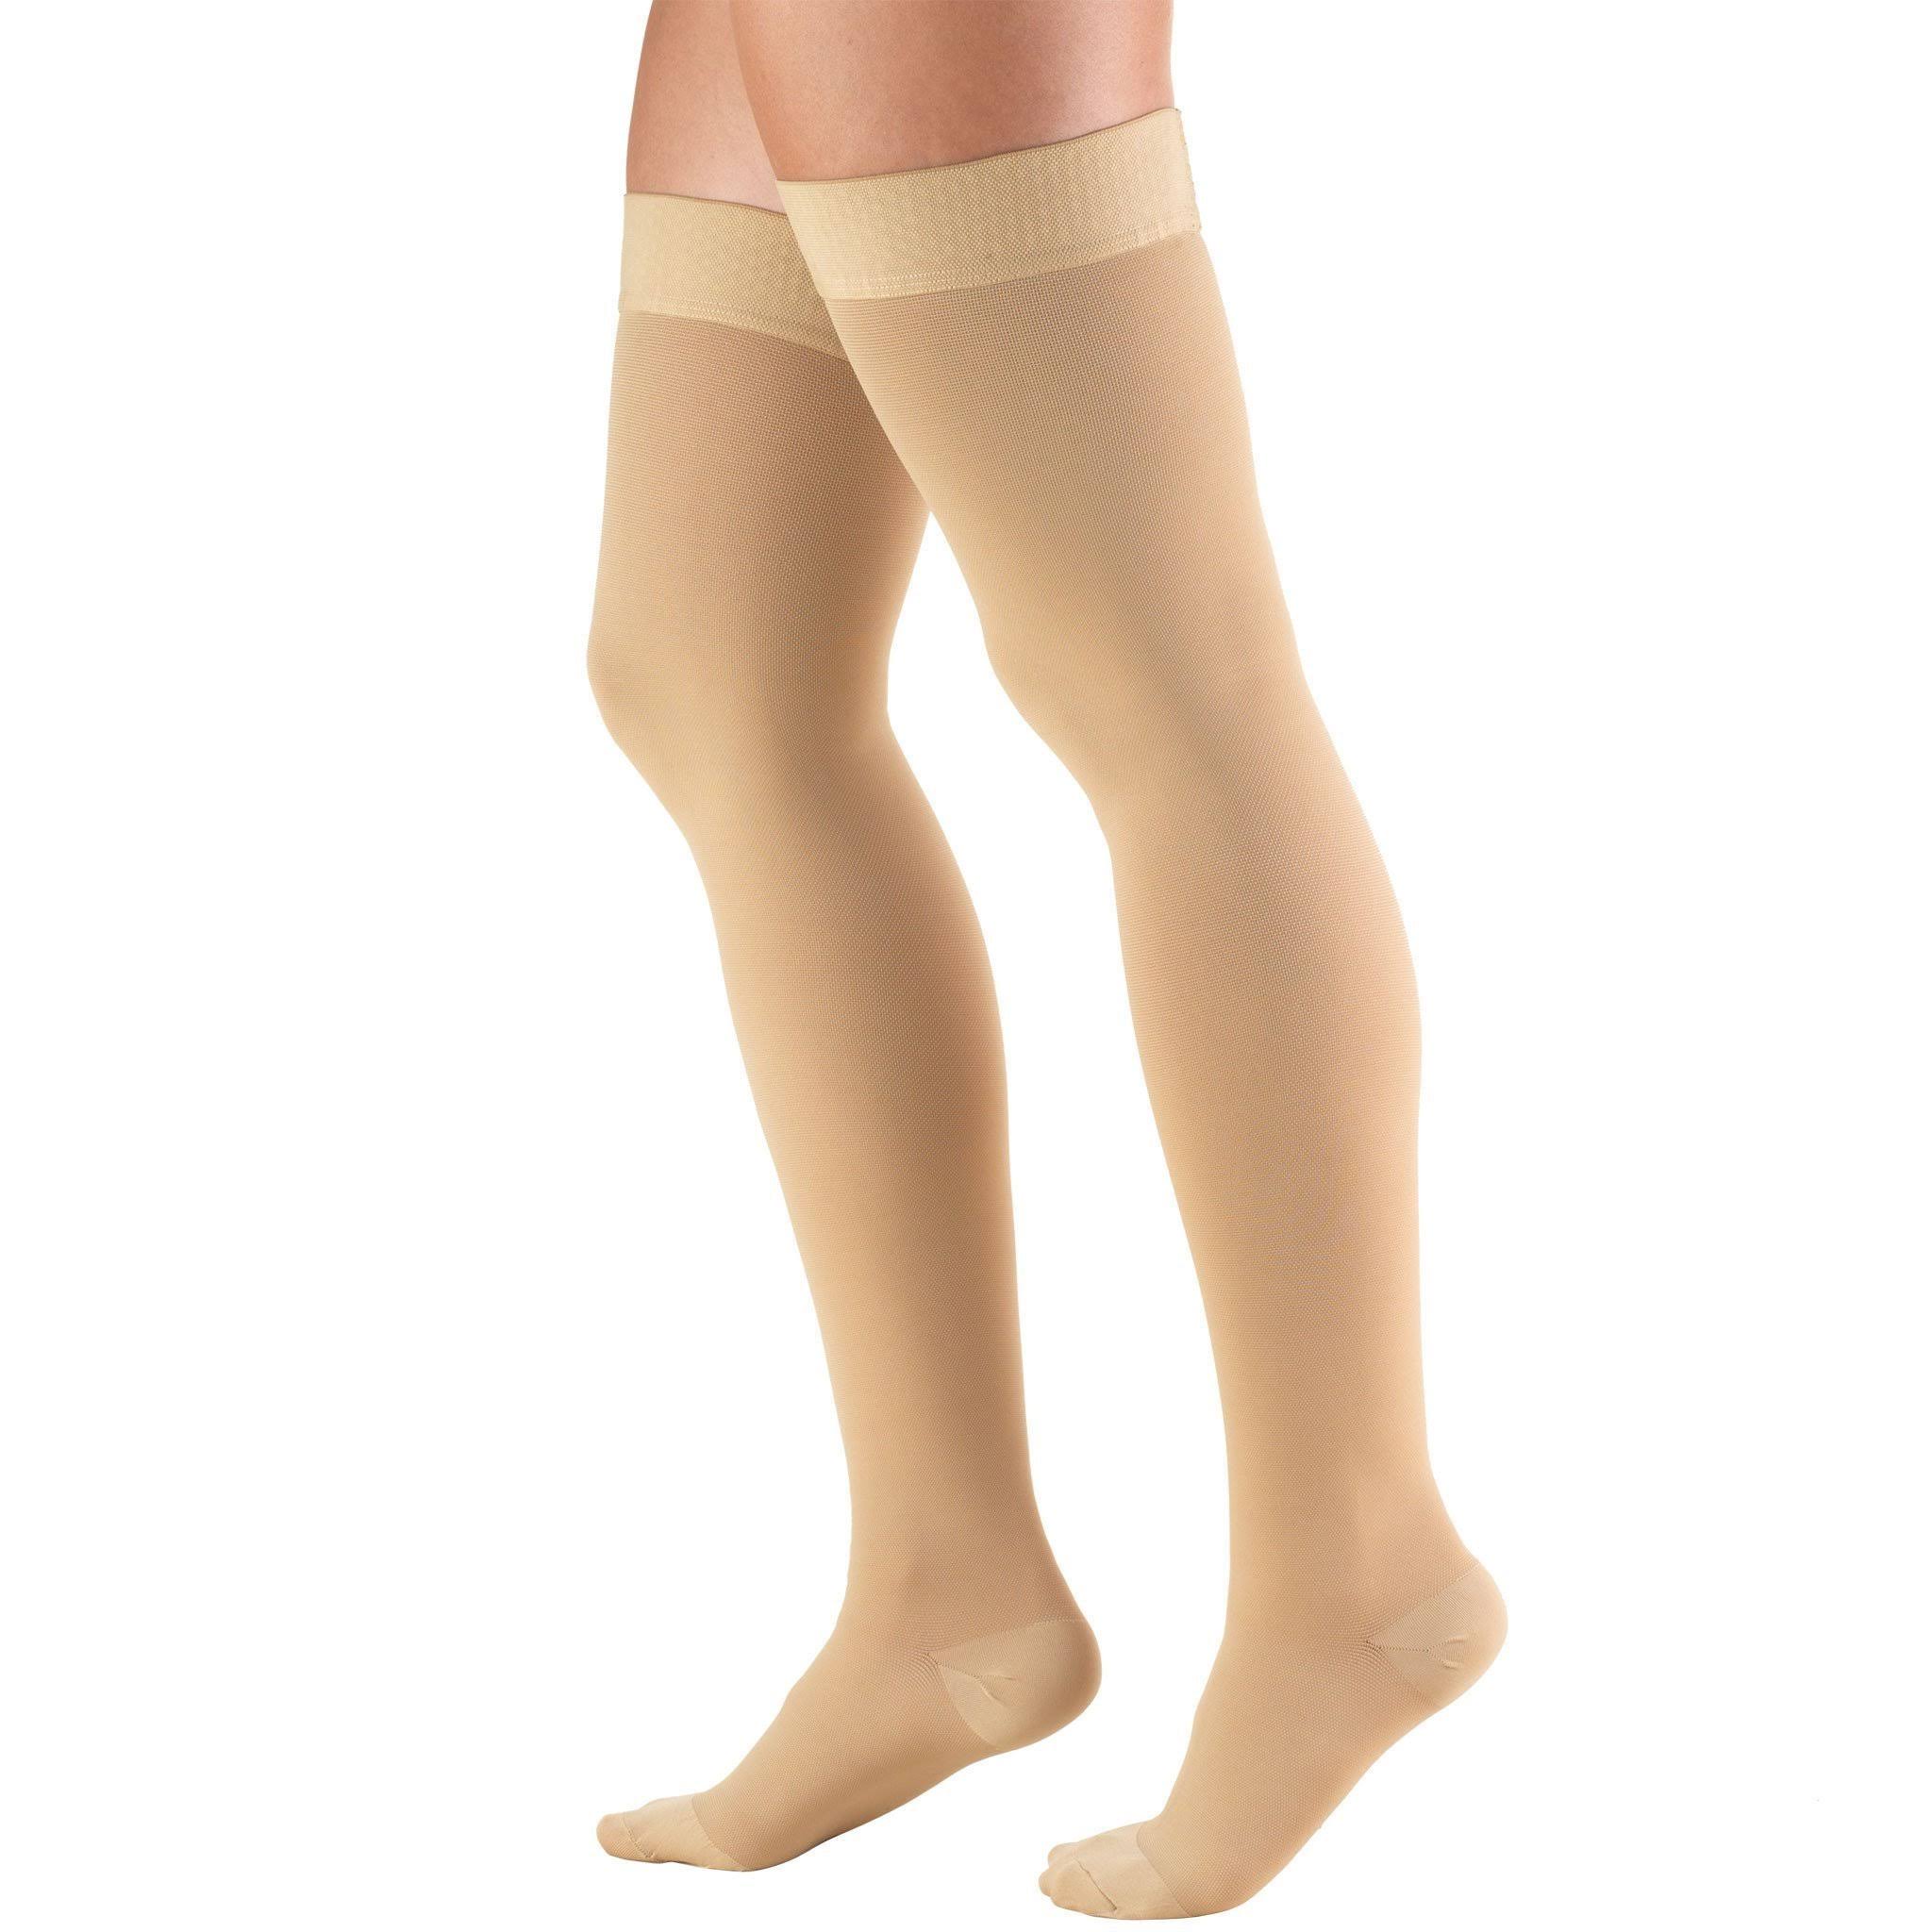 Truform Closed Toe Thigh High Compression Stockings - Dot Top, Beige, Large, 20 to 30 mmHg